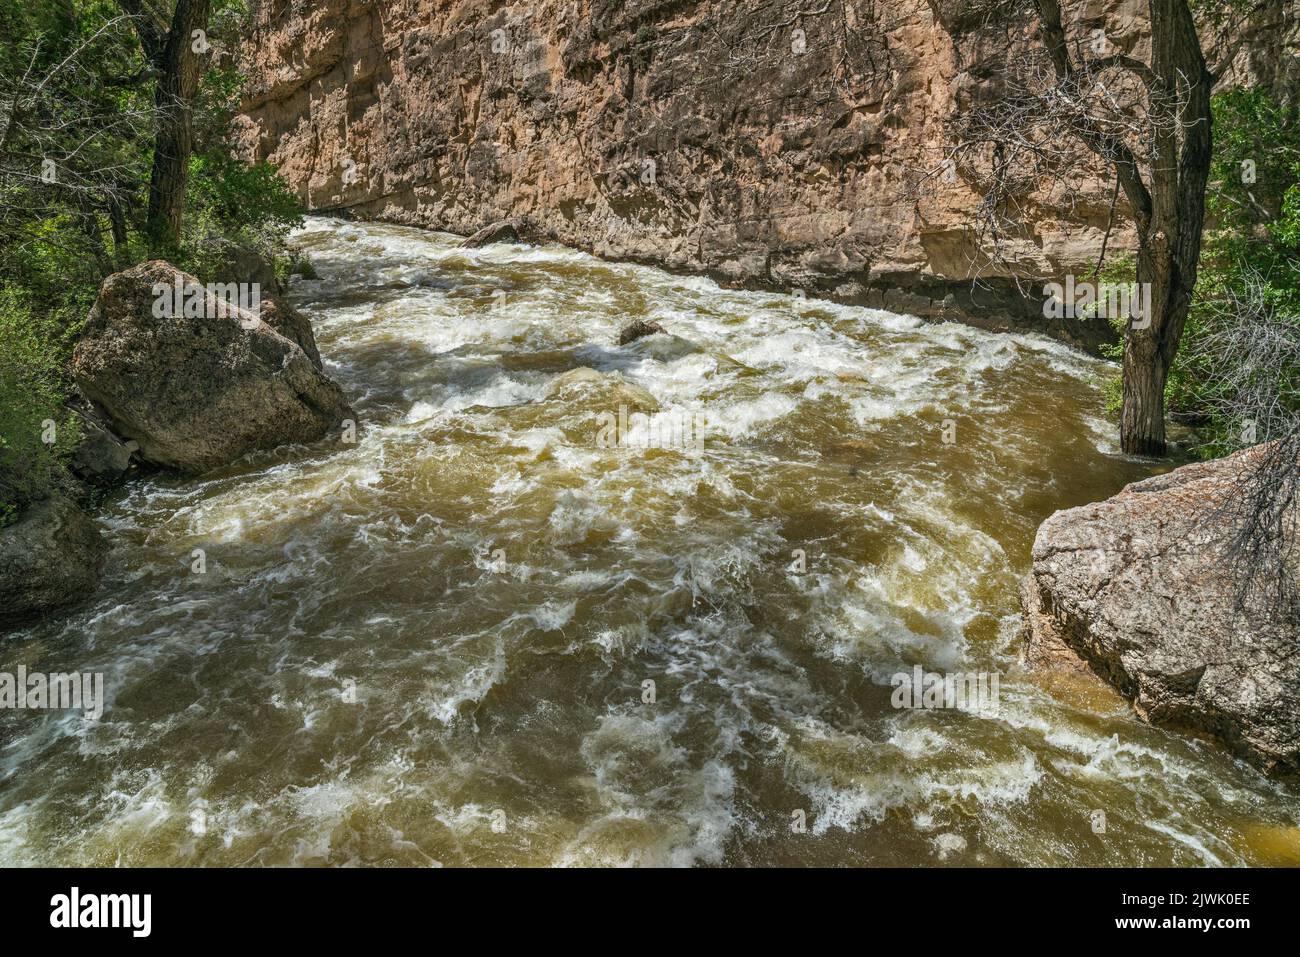 Shell Creek rapids, Shell Canyon, Bighorn Mountains, Bighorn National Forest, Wyoming, USA Stock Photo